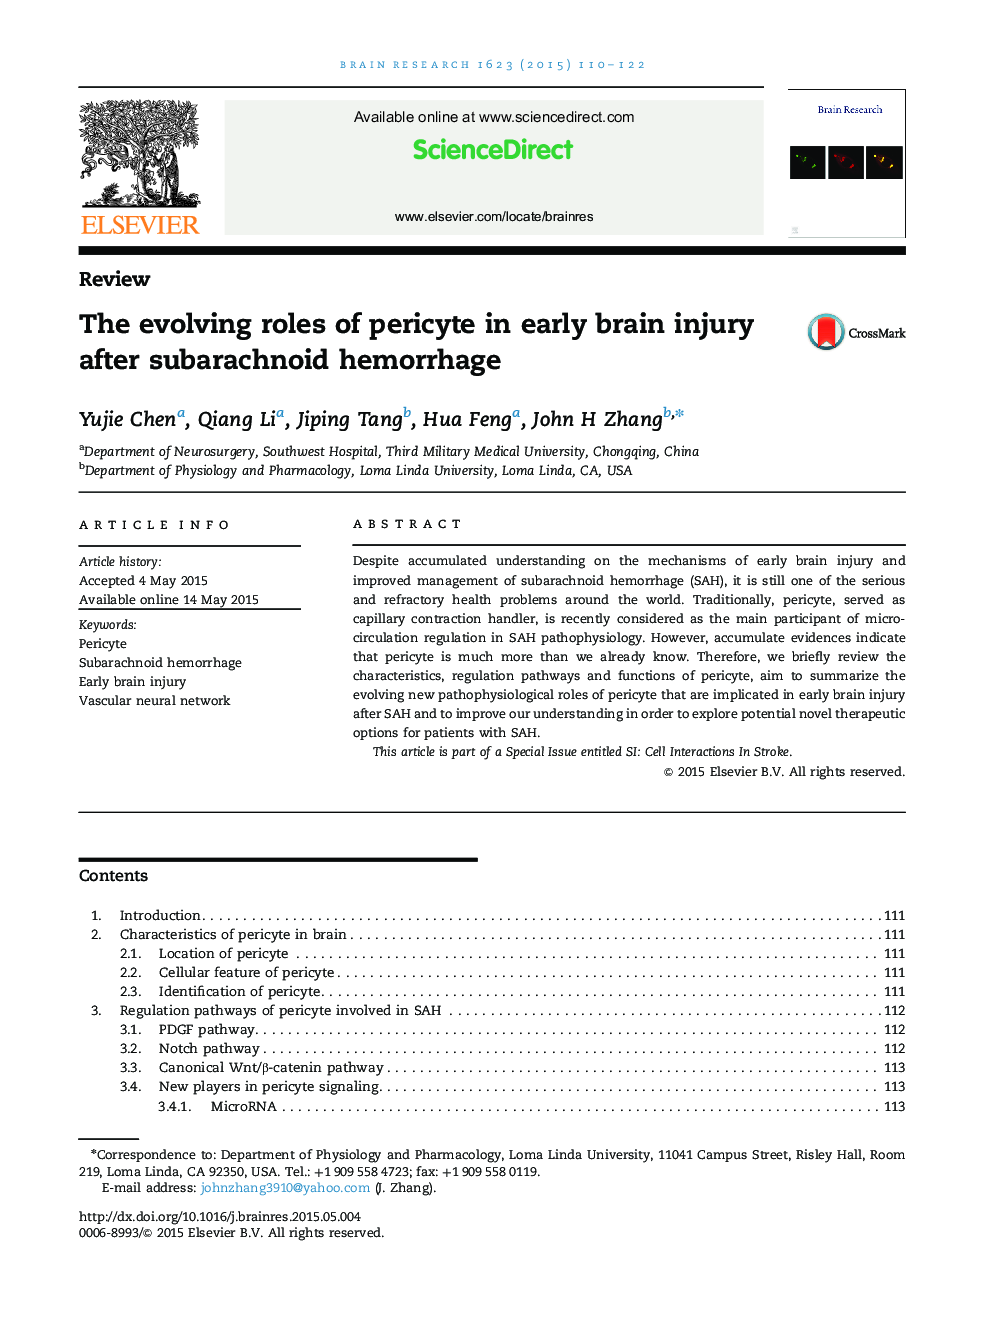 The evolving roles of pericyte in early brain injury after subarachnoid hemorrhage